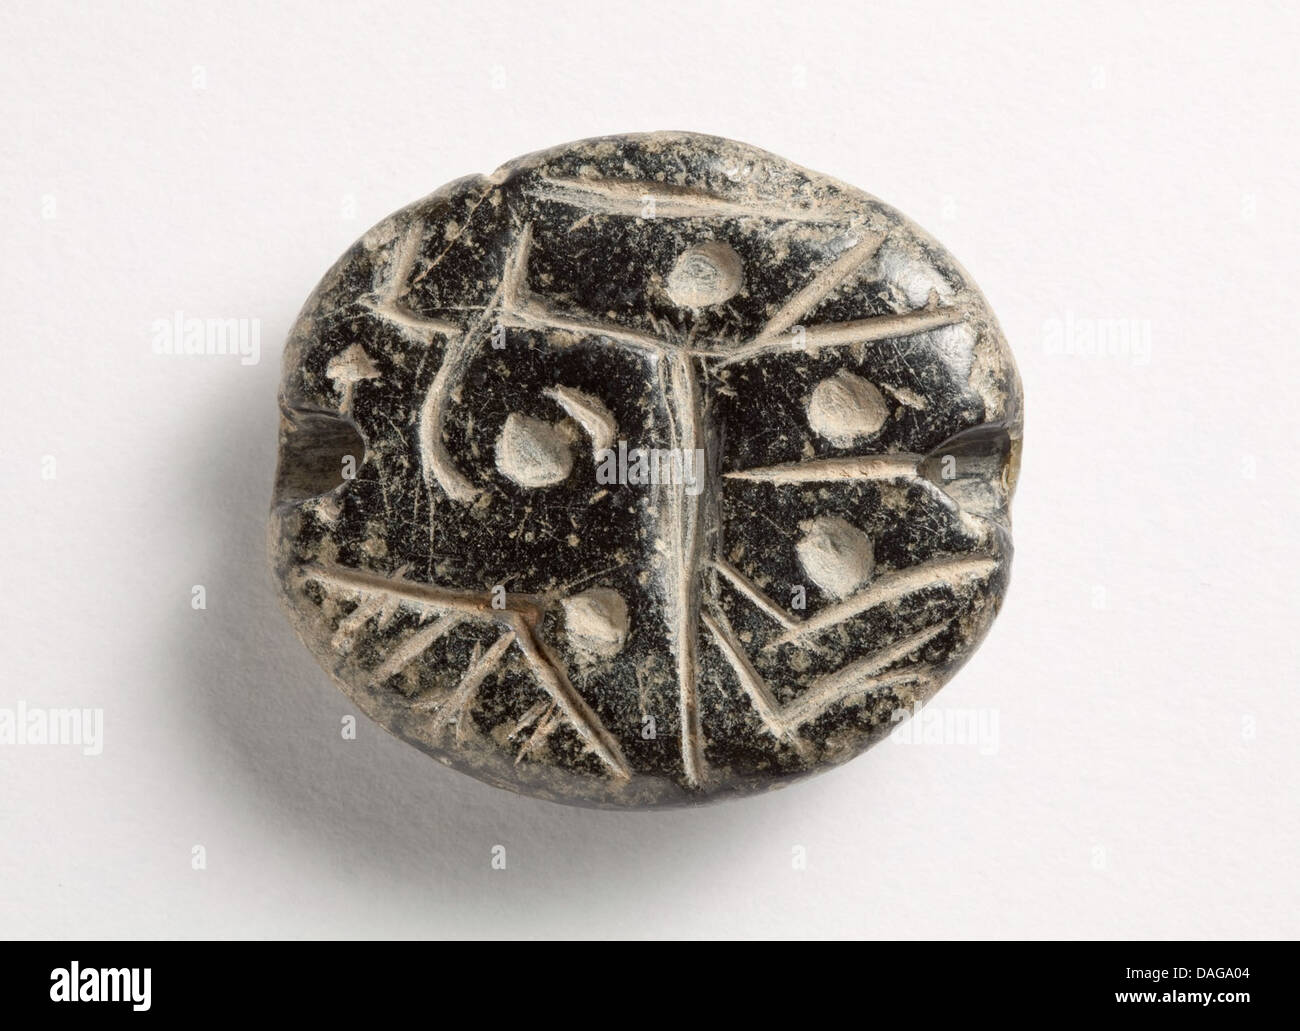 Stamp Seal, Hemispheroid with Flattened End, Back Reworked LACMA M.76.174.554 Stock Photo